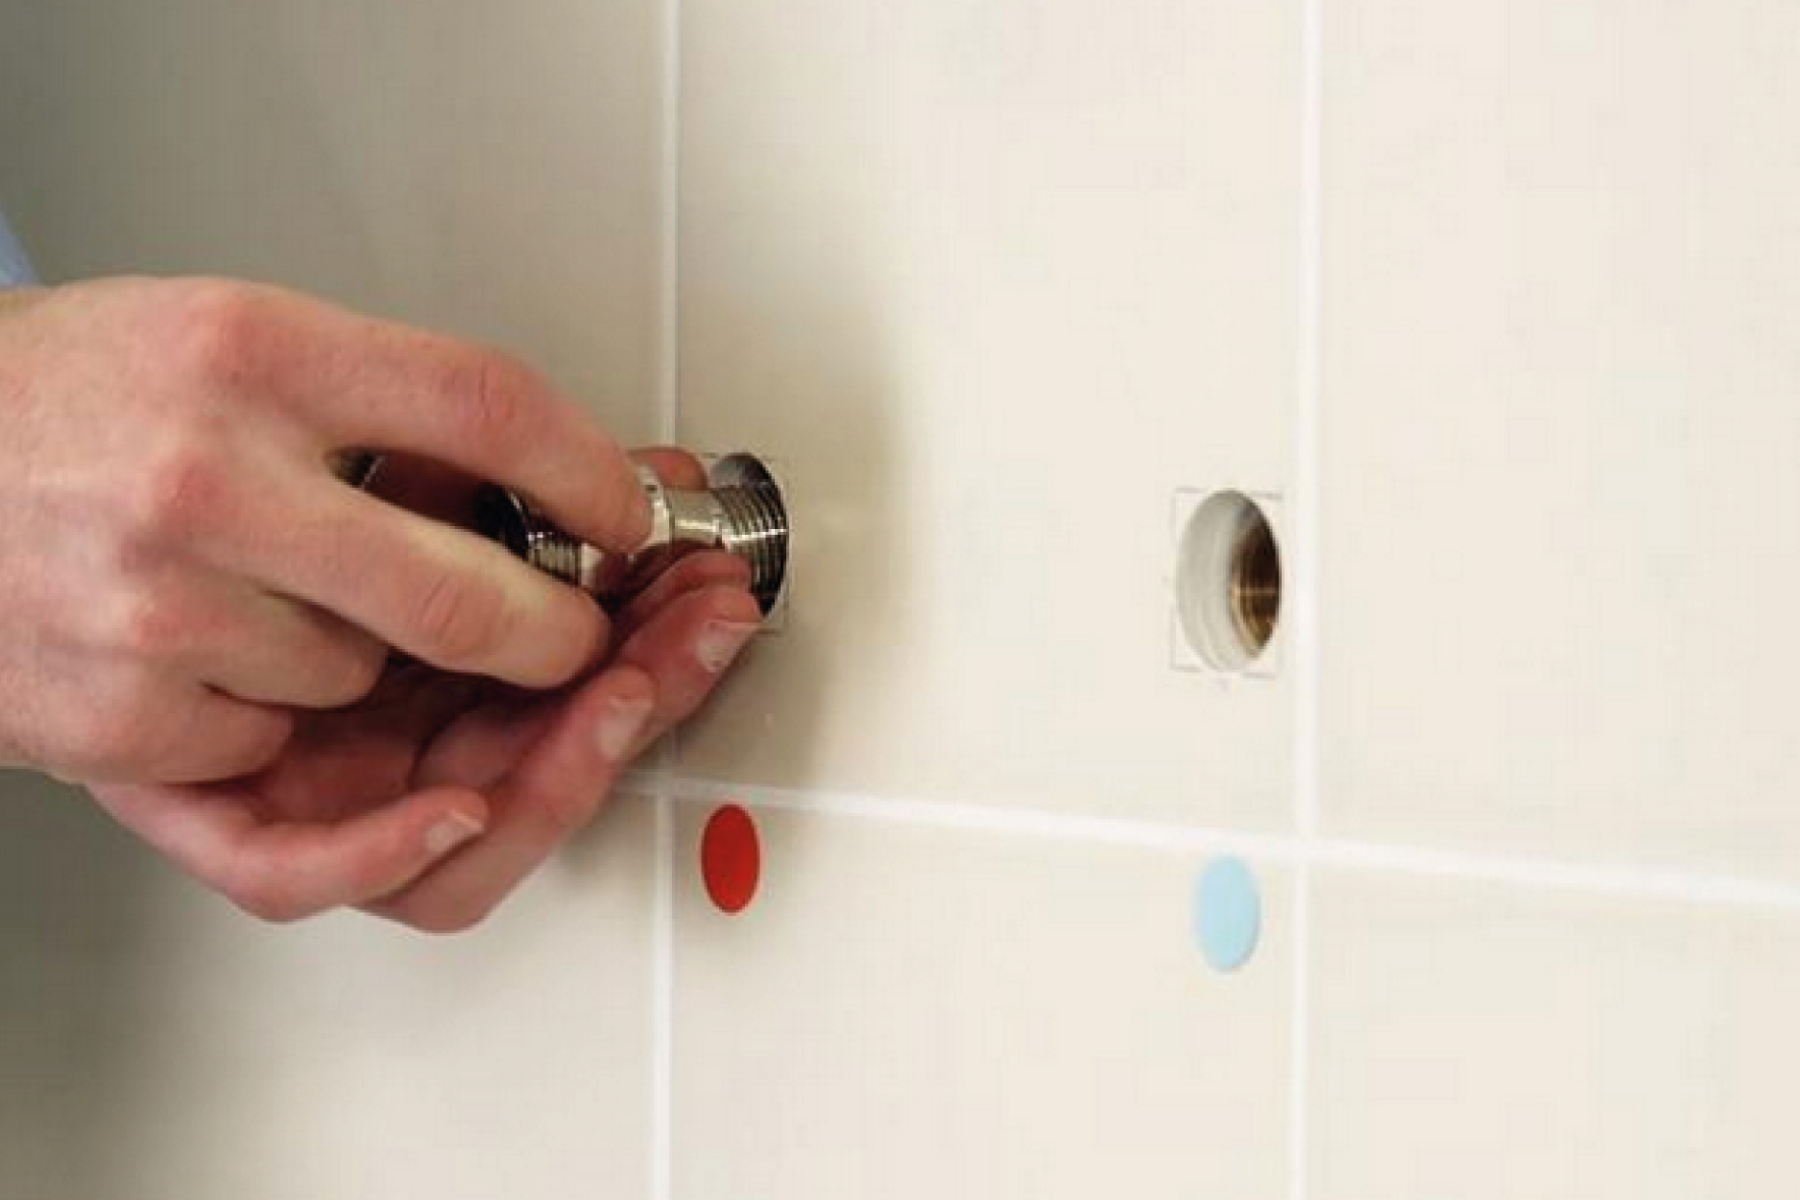 Plumber Inserting Valves Into Tiled Wall For Mixer Shower Installation 